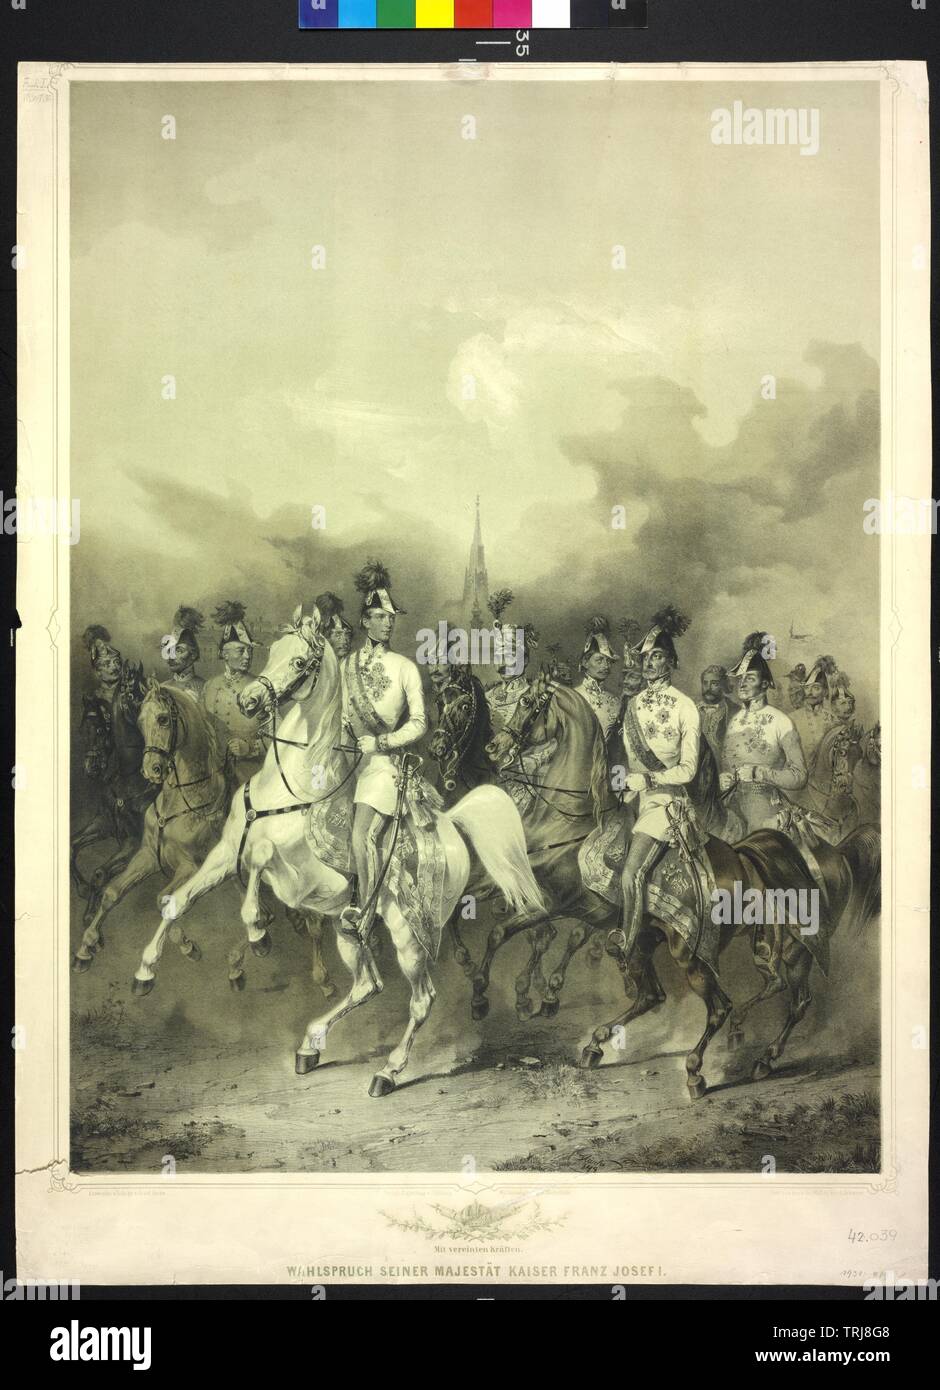 Franz Joseph I, Emperor of Austria, equestrian image uniformed, surround by officers on horse, lithograph by Joseph Heicke, Additional-Rights-Clearance-Info-Not-Available Stock Photo